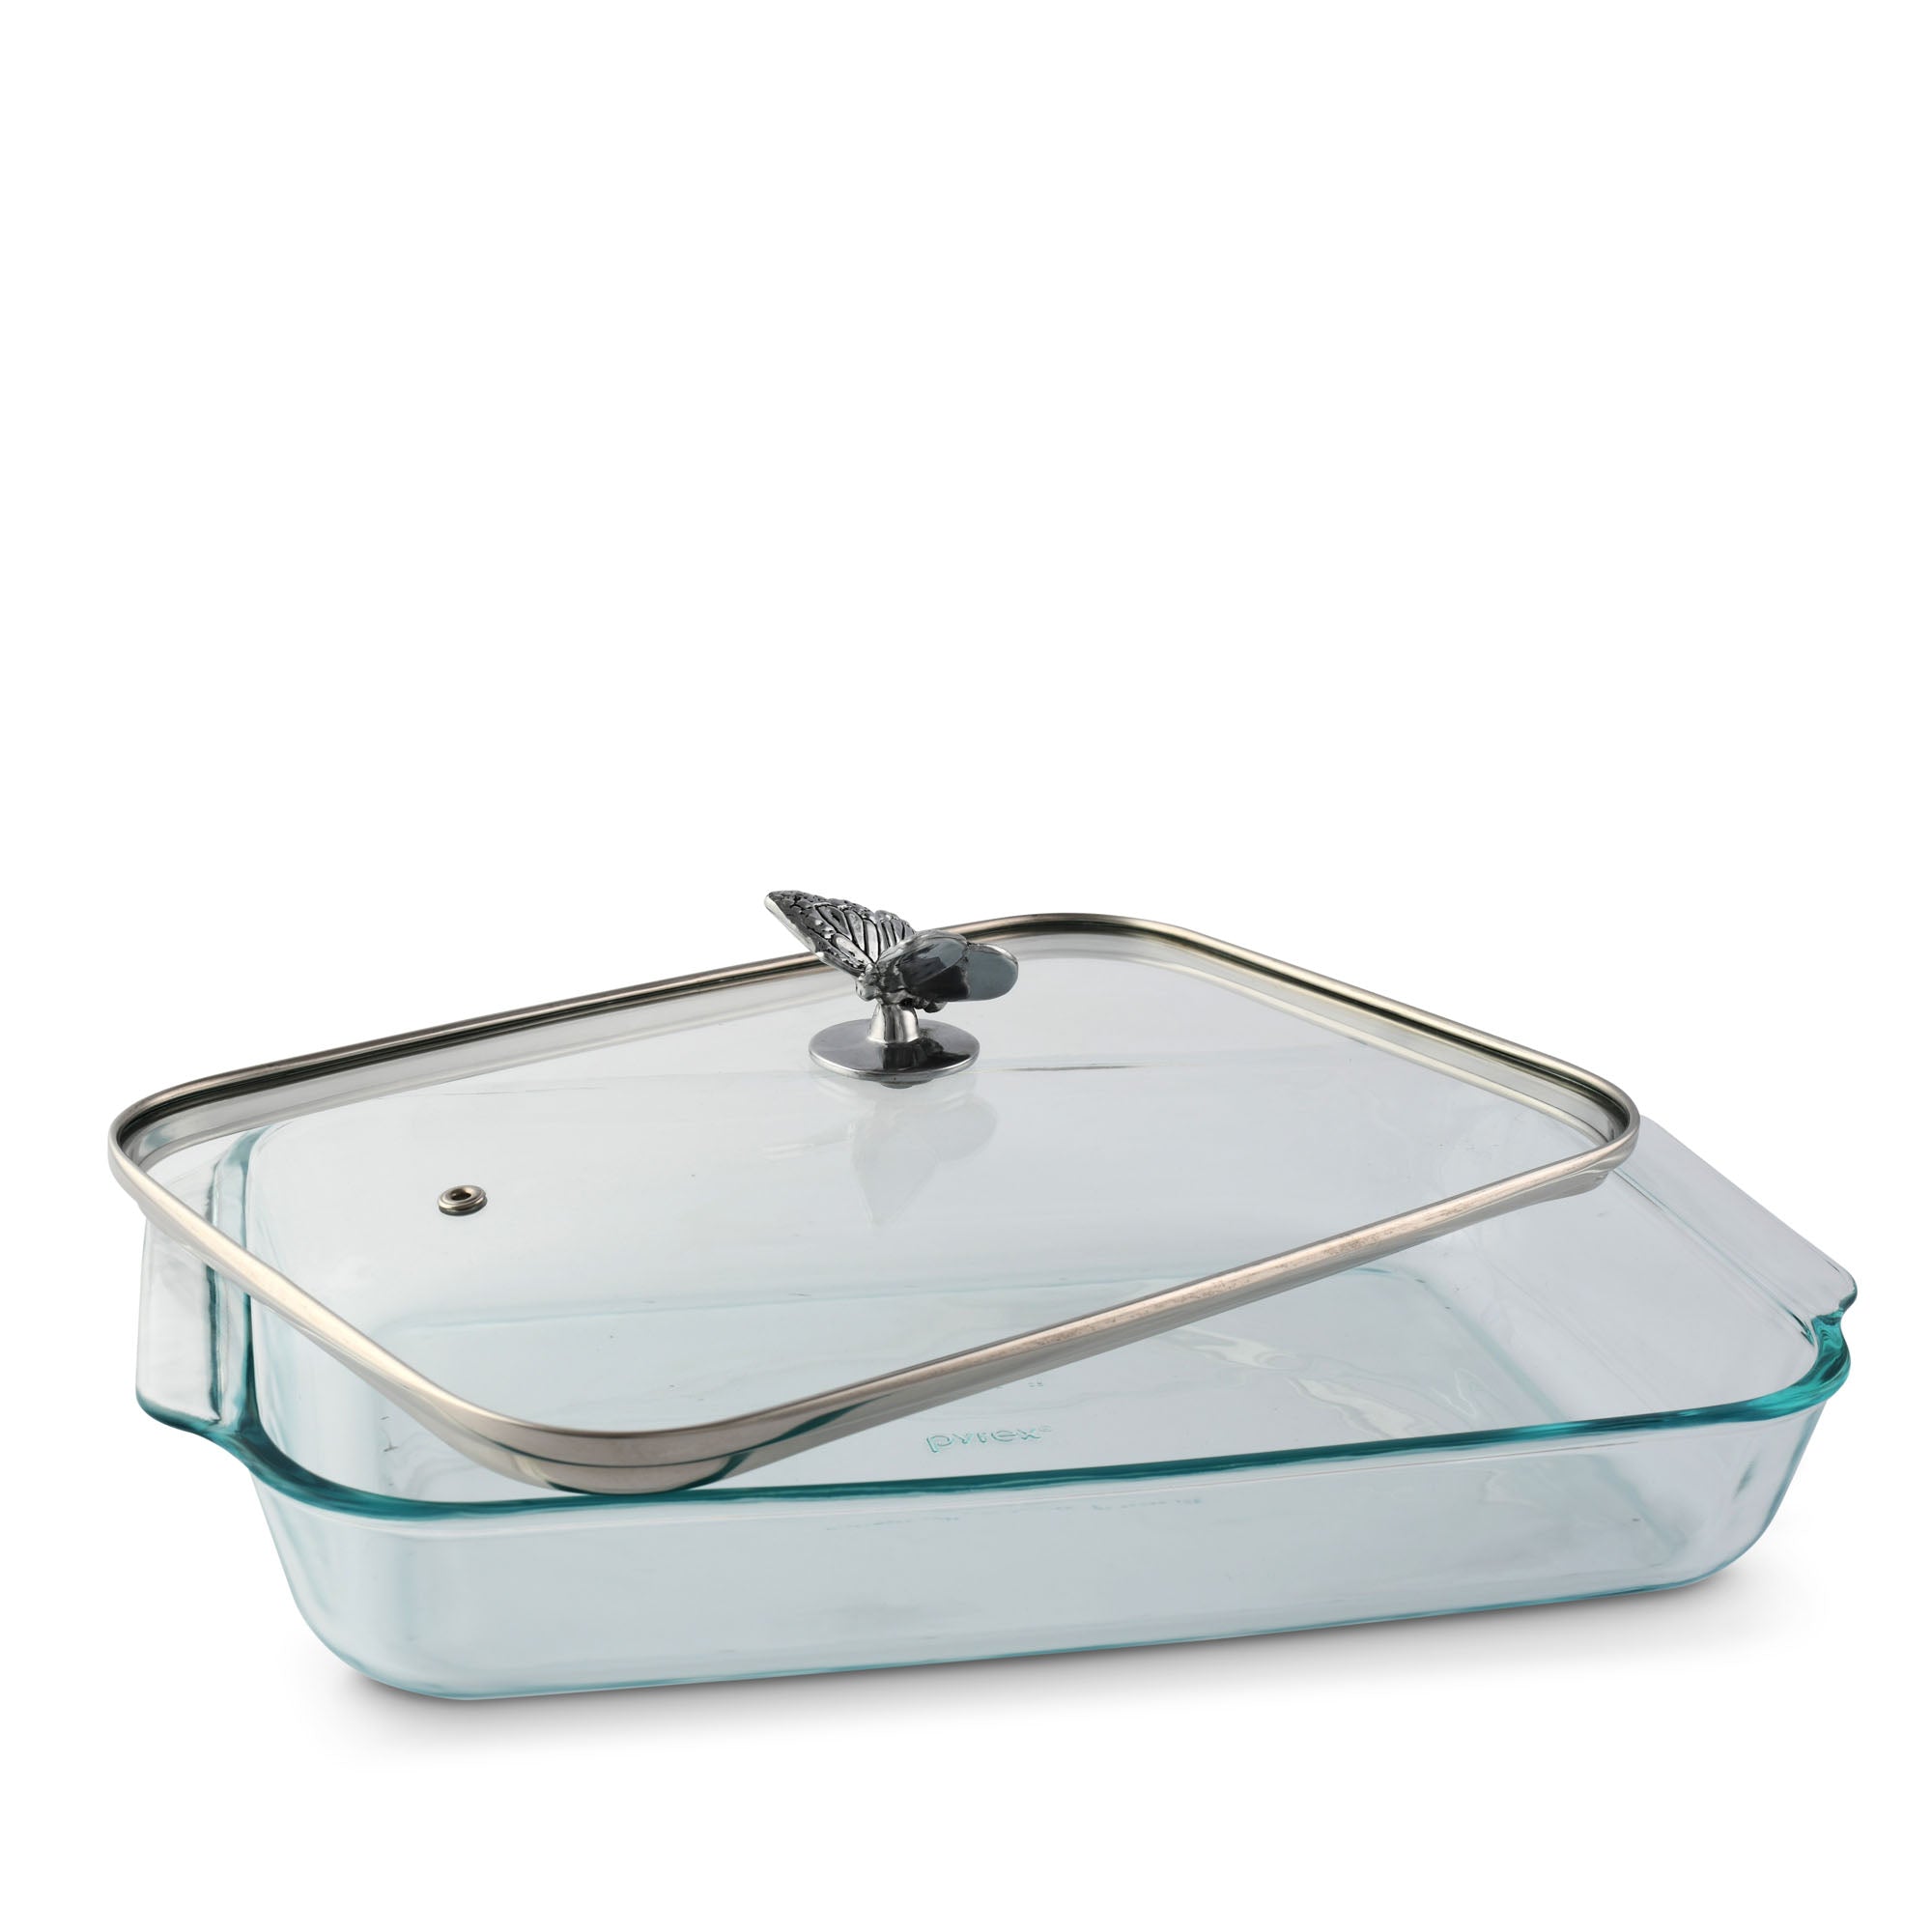 Arthur Court Butterfly Lid with Pyrex 3 quart Baking Dish Product Image